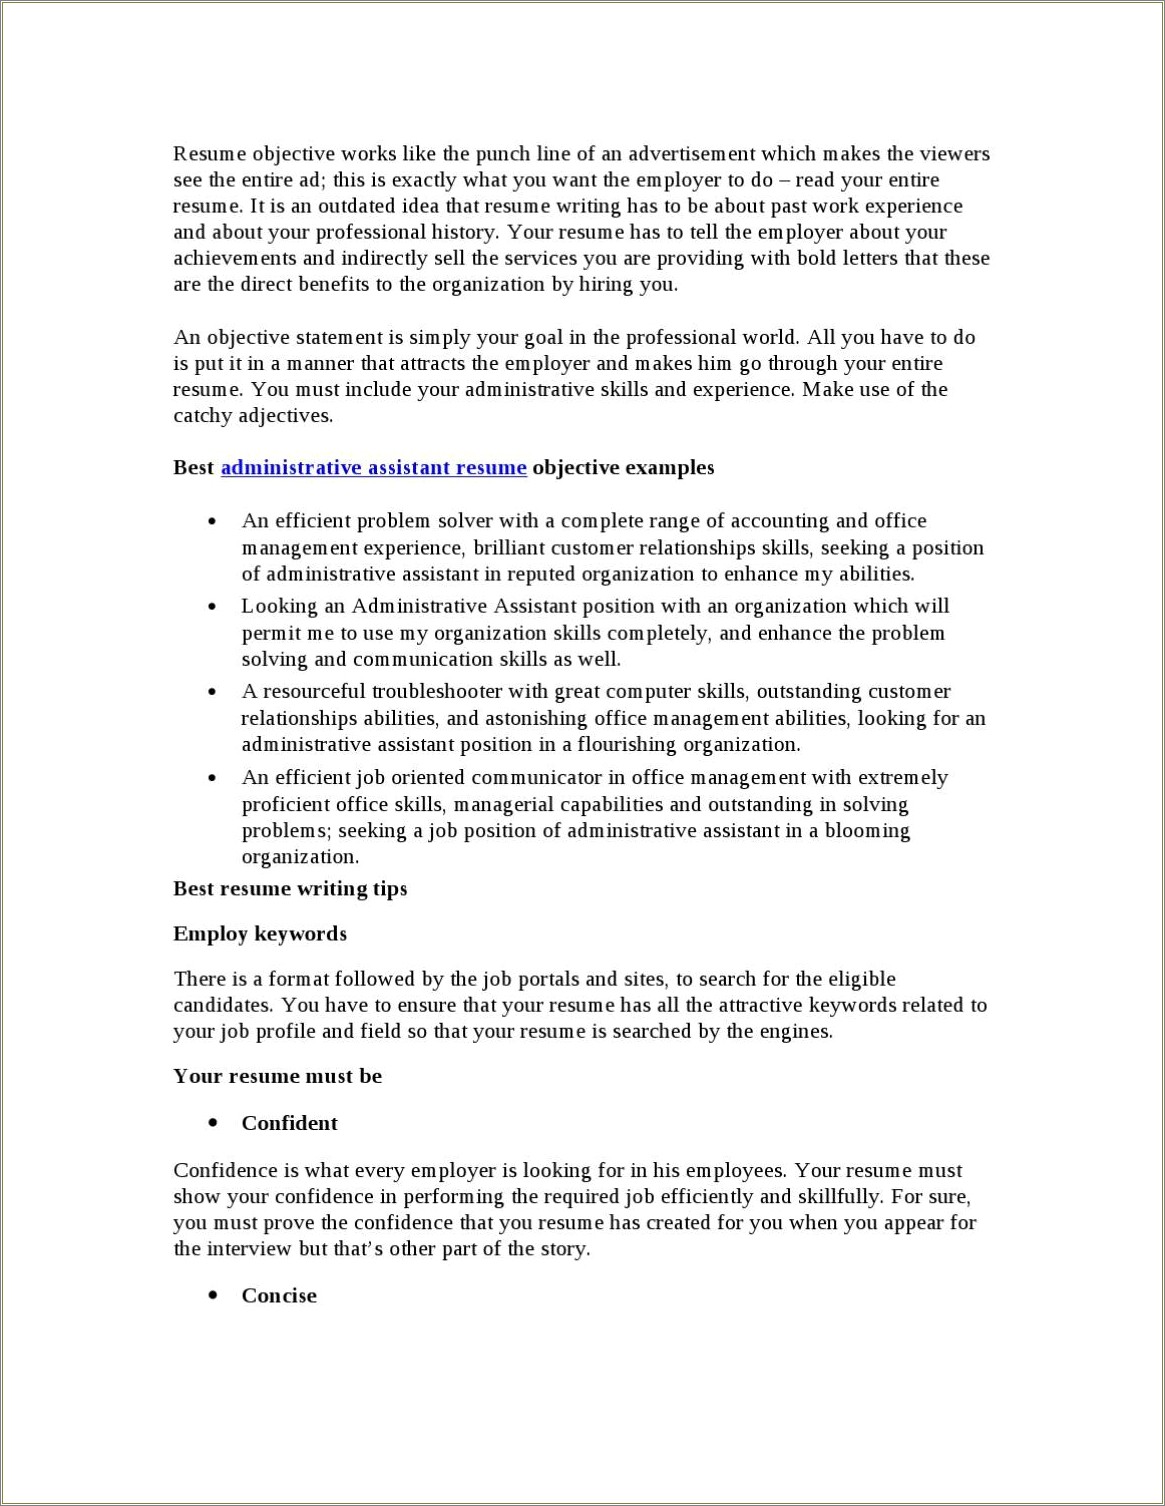 Sample Resume Objective Statements For Administrative Assistant